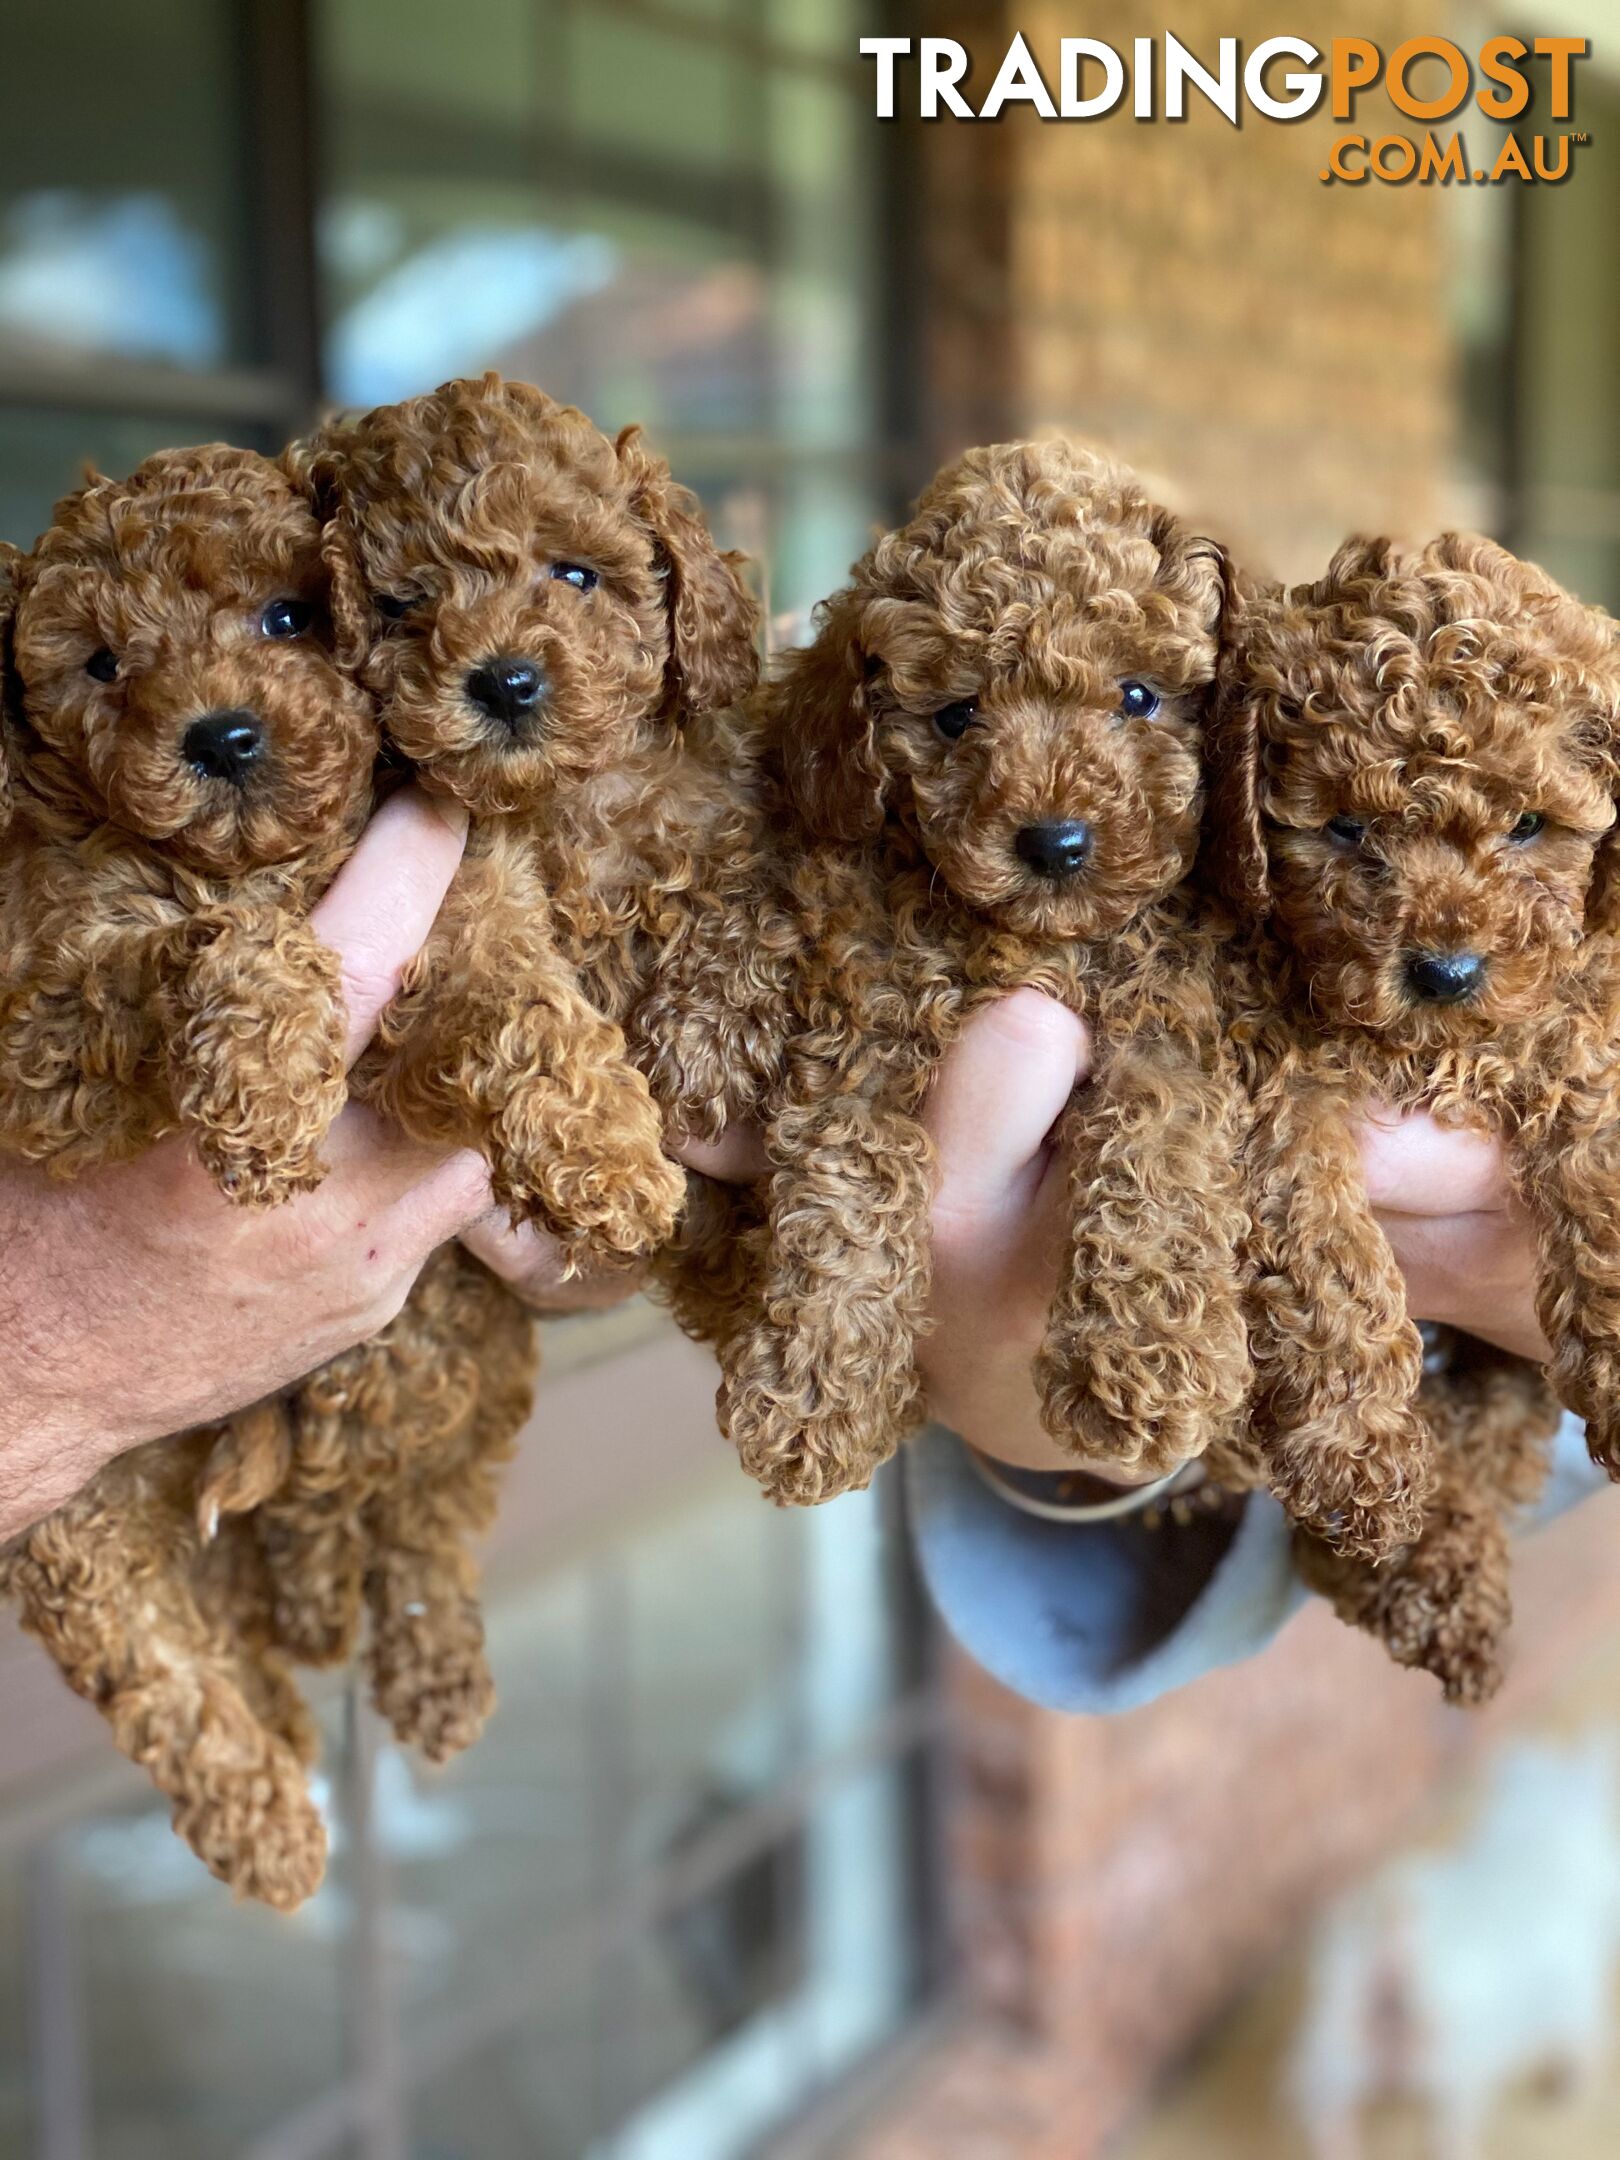 Red Toy Poodle Stud Service for Cavoodle, Oodles DNA CLEAR